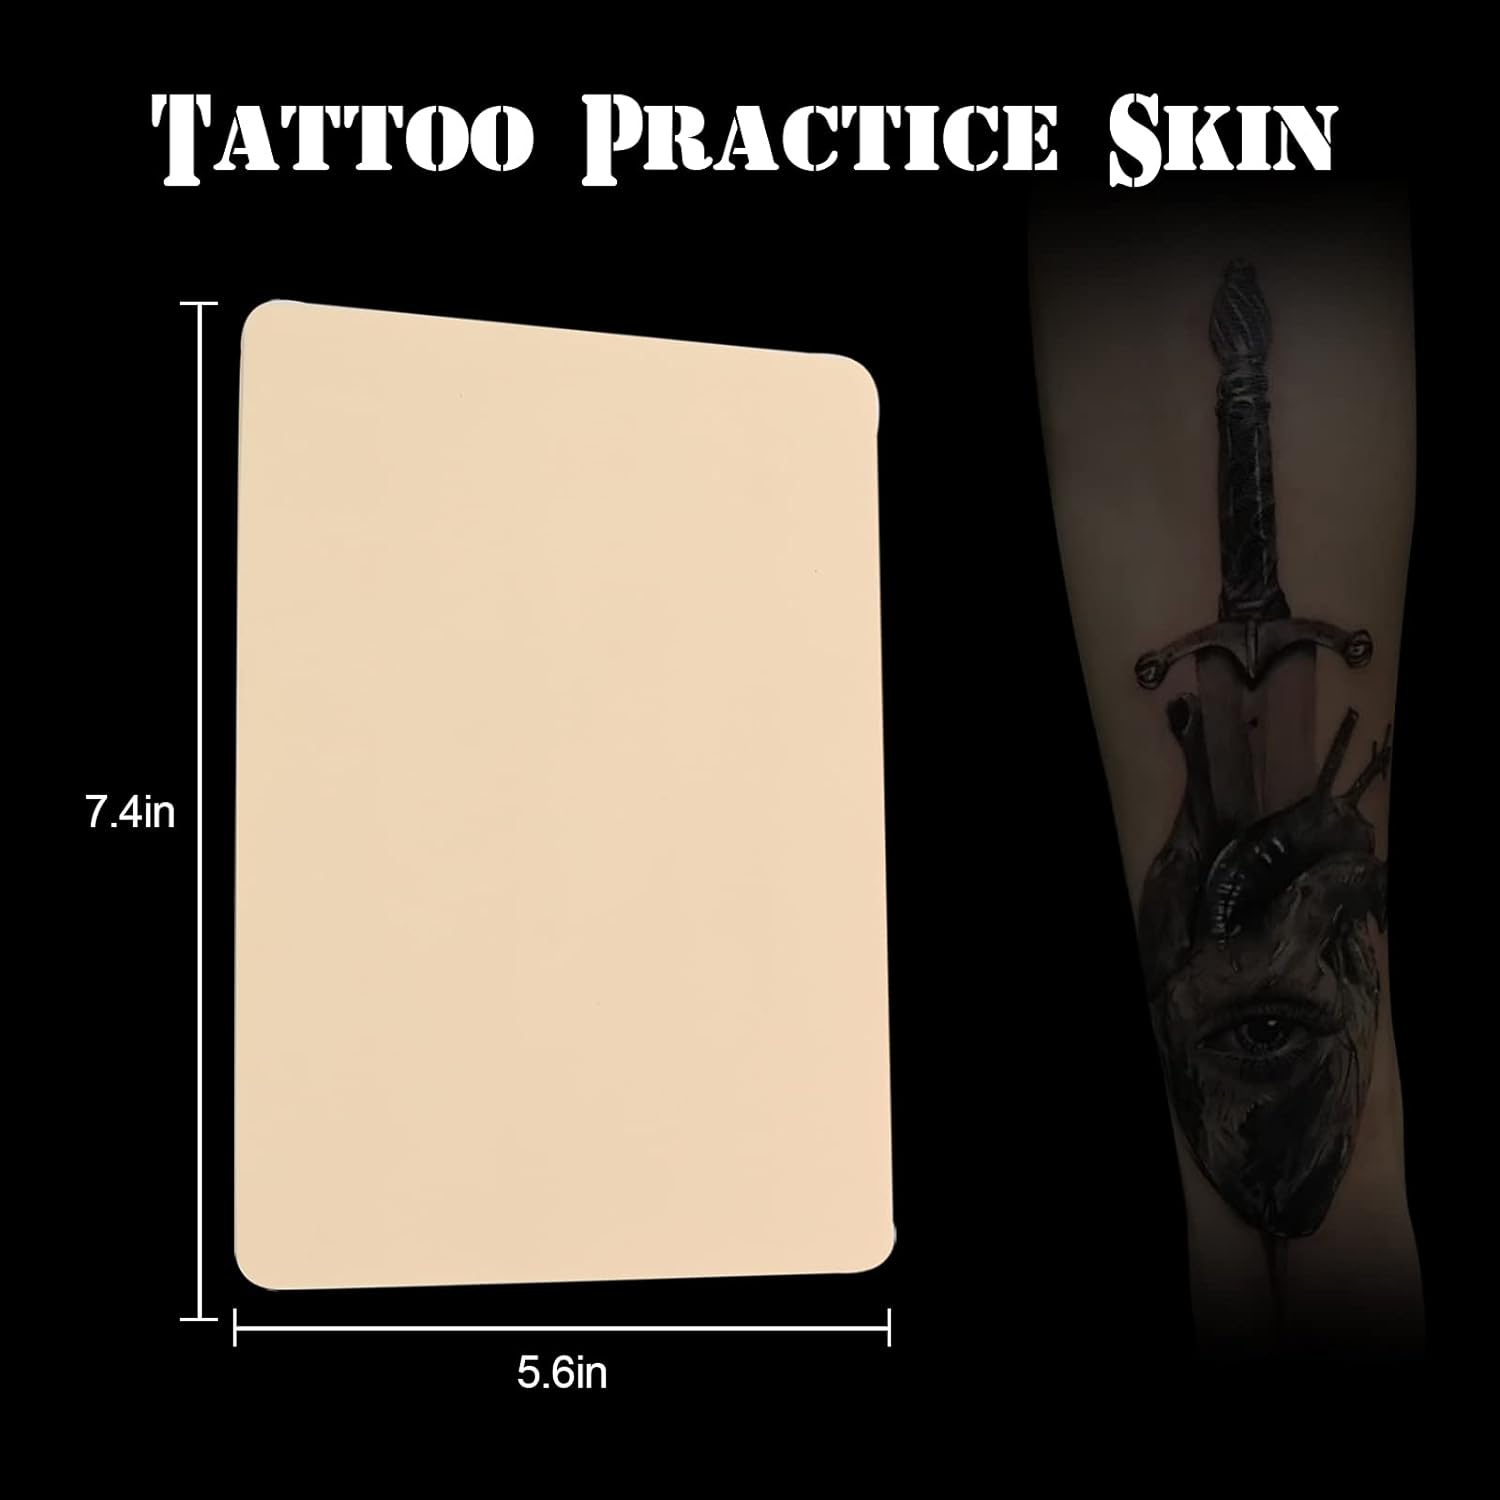 Tattoo Practice Skin Jconly 20 Sheets 8×6 Double Sides Fake Tattoo Skin, Microblading Eyebrows or Lips to Practice Skin,for Beginners and Experience